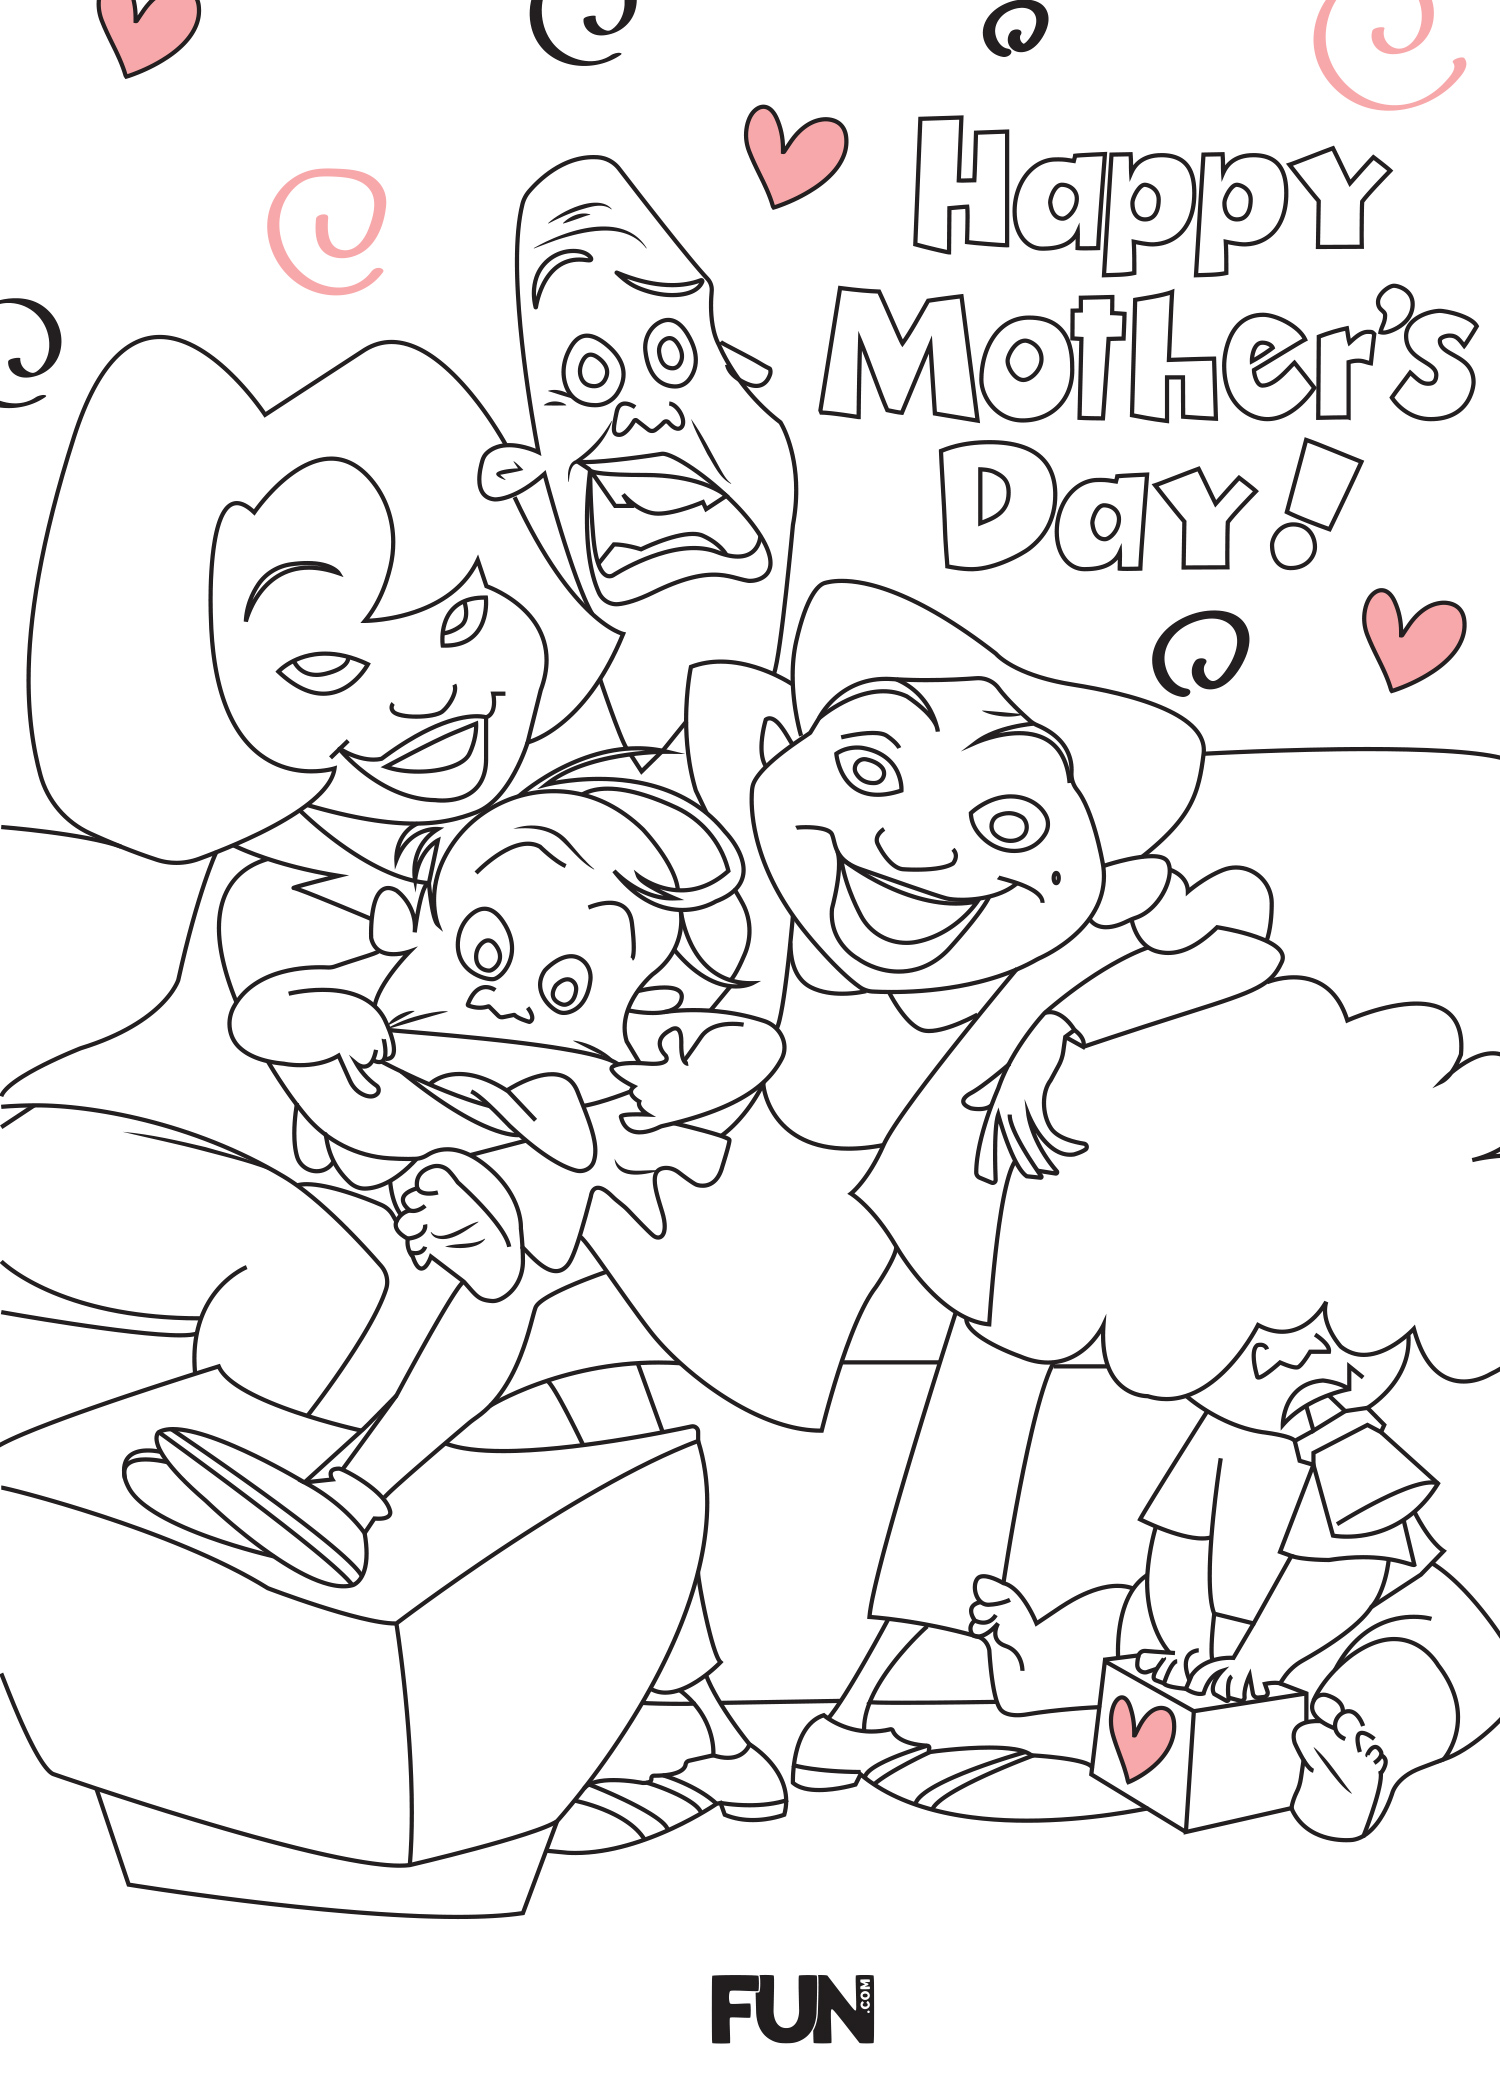 The Proud Family Mother's Day Card